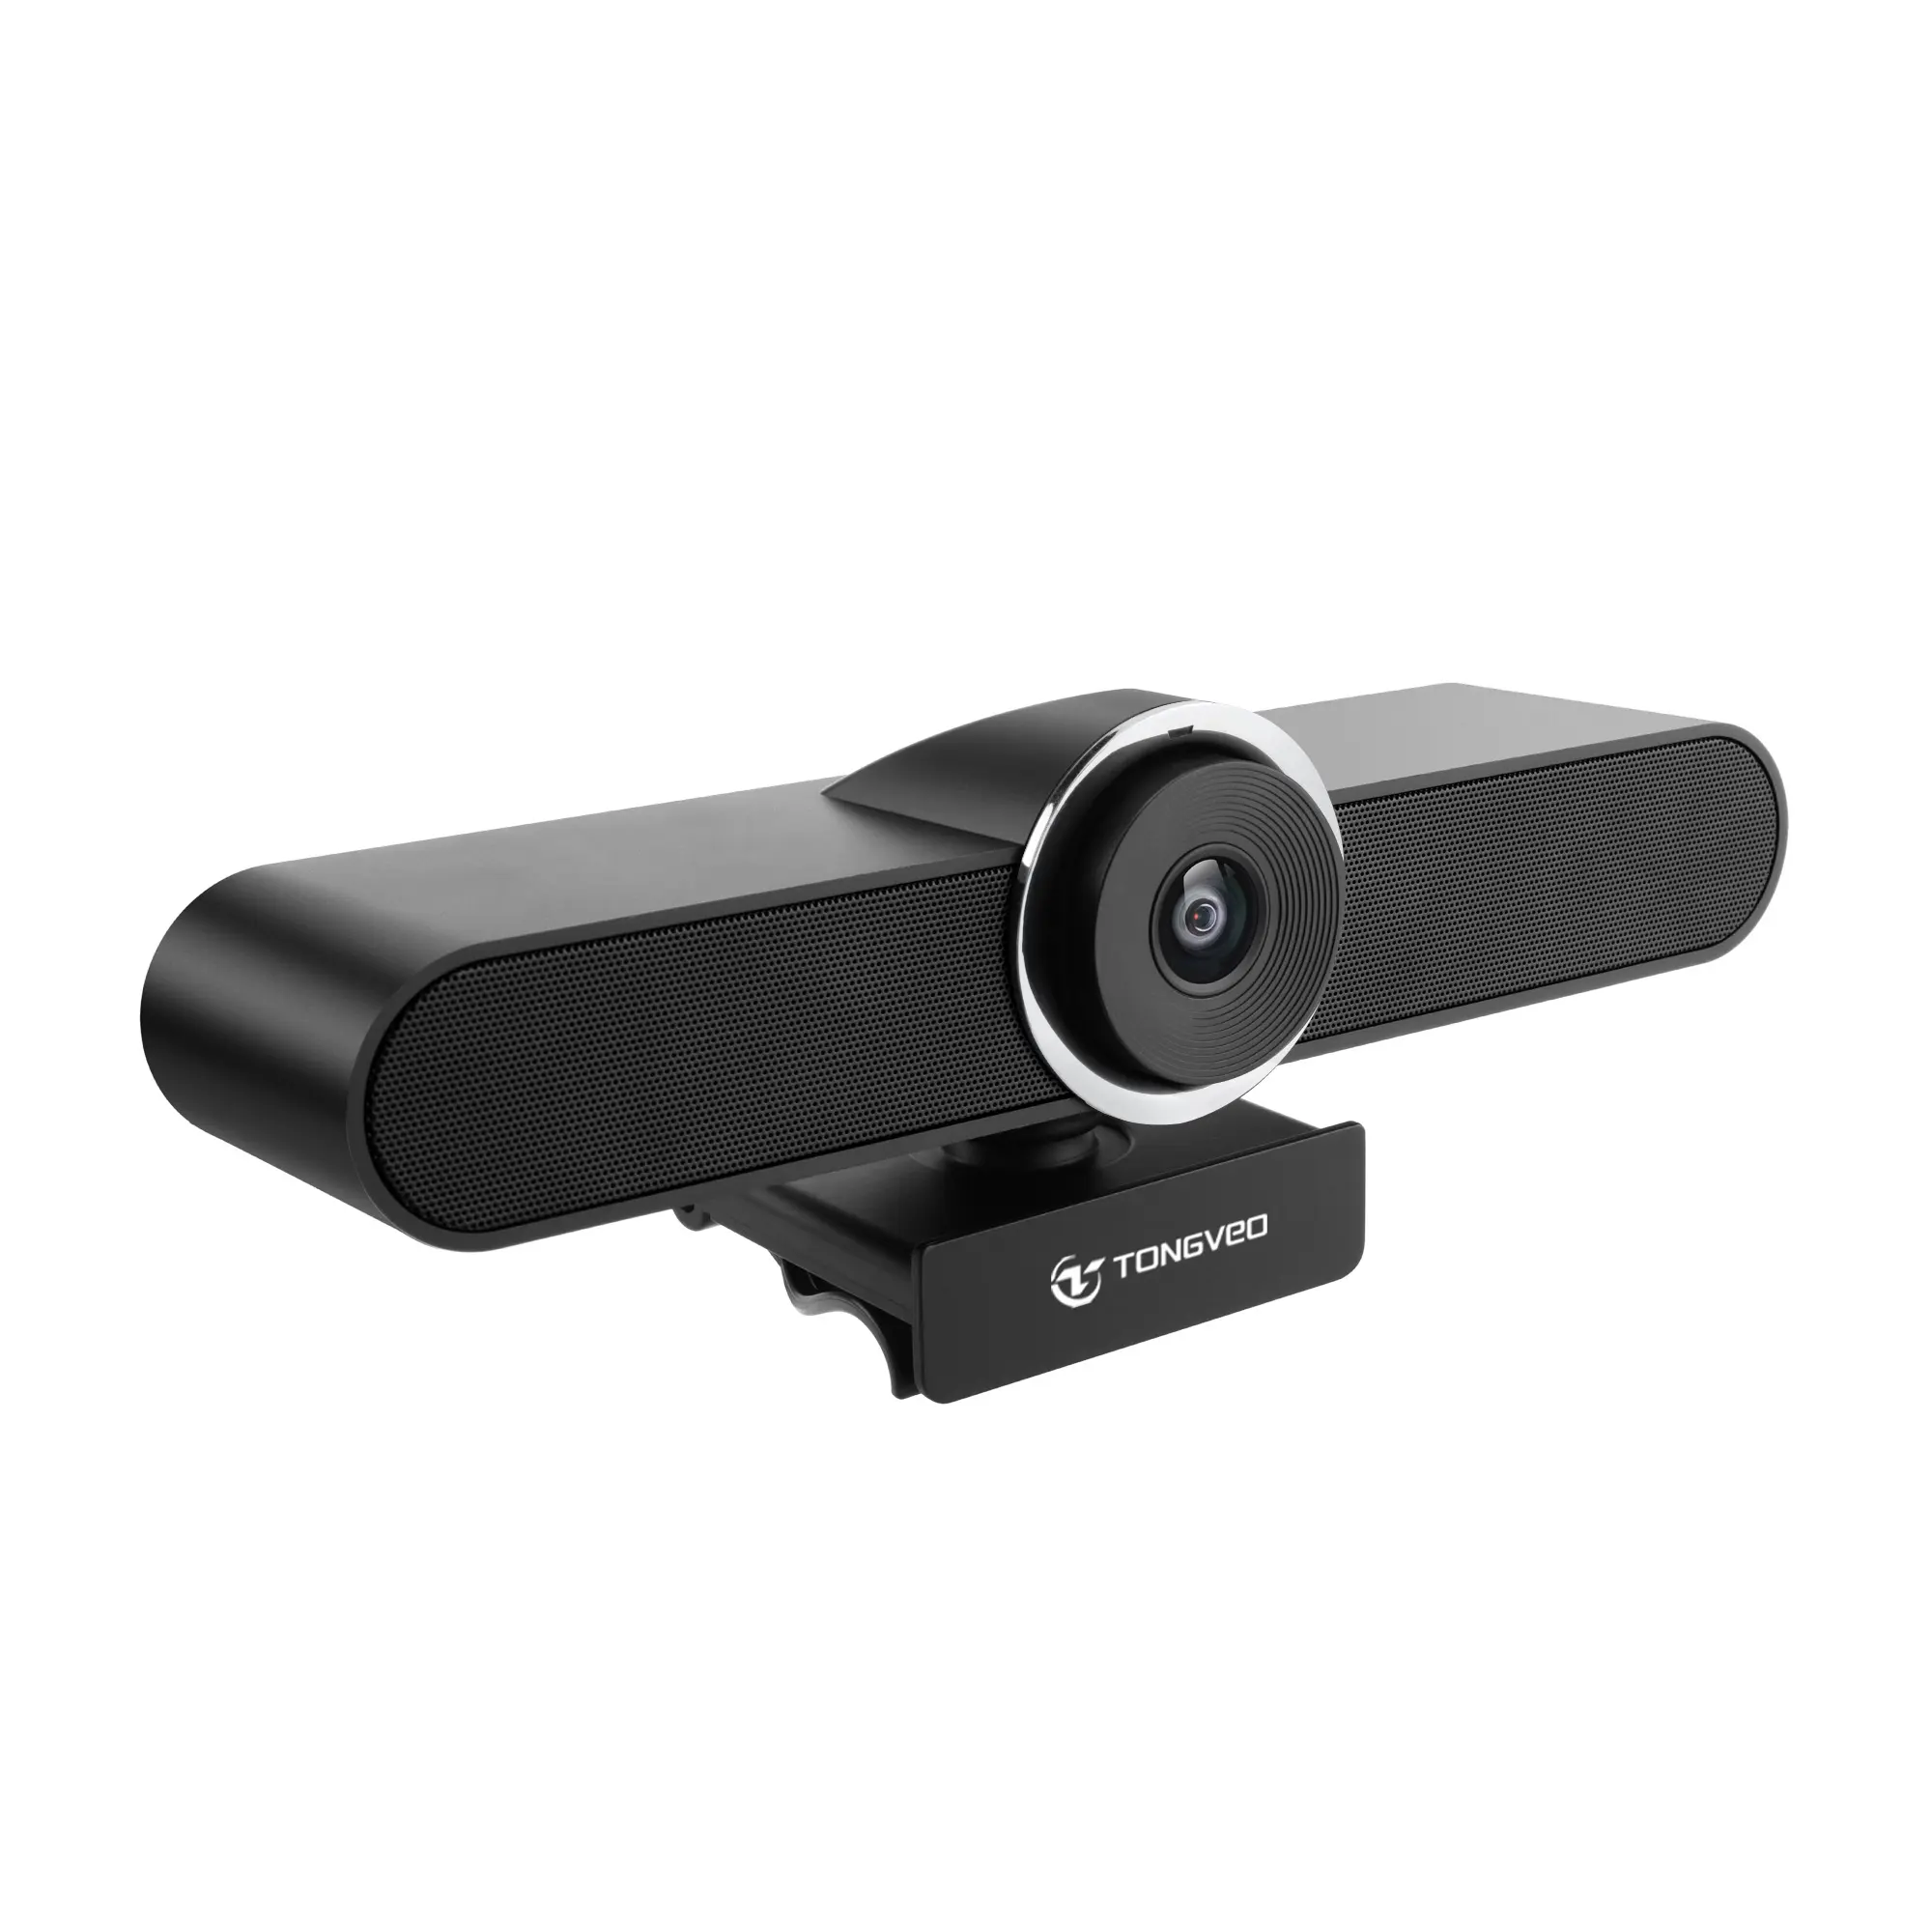 CC102 1080p High Definition All in One Webcam Audio and Video Camera with Built-in Microphones and Speaker